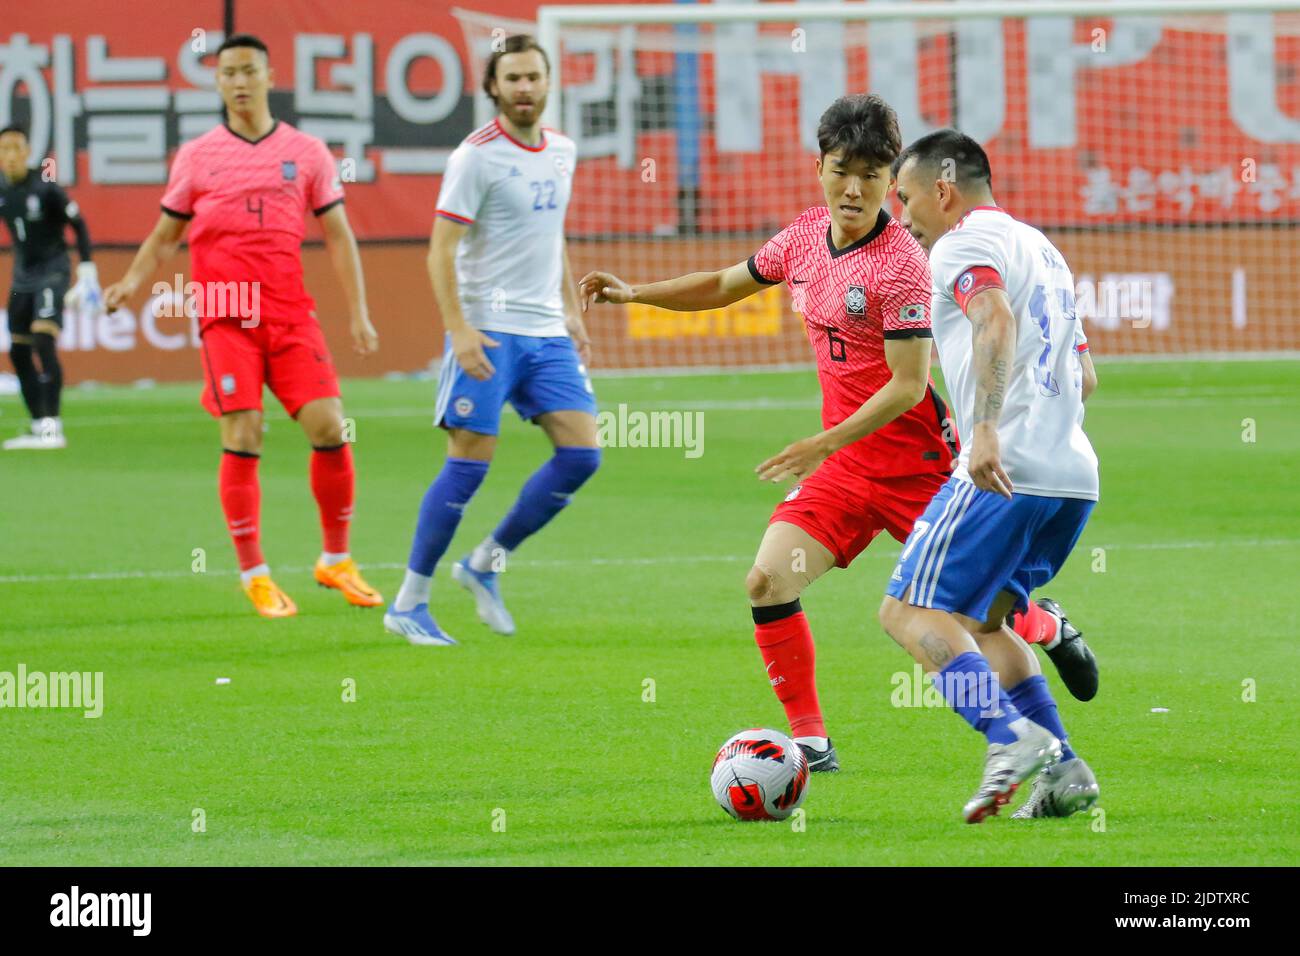 June 6, 2022-Daejeon, South Korea-Hwang, Inbeom of South Korea and Medel, Gary of Chile action during an International Friendly match Presented by Hana Bank Korea Republic vs Chile at Daejeon Worldcup Stadium in Daejeon, South Korea. Stock Photo